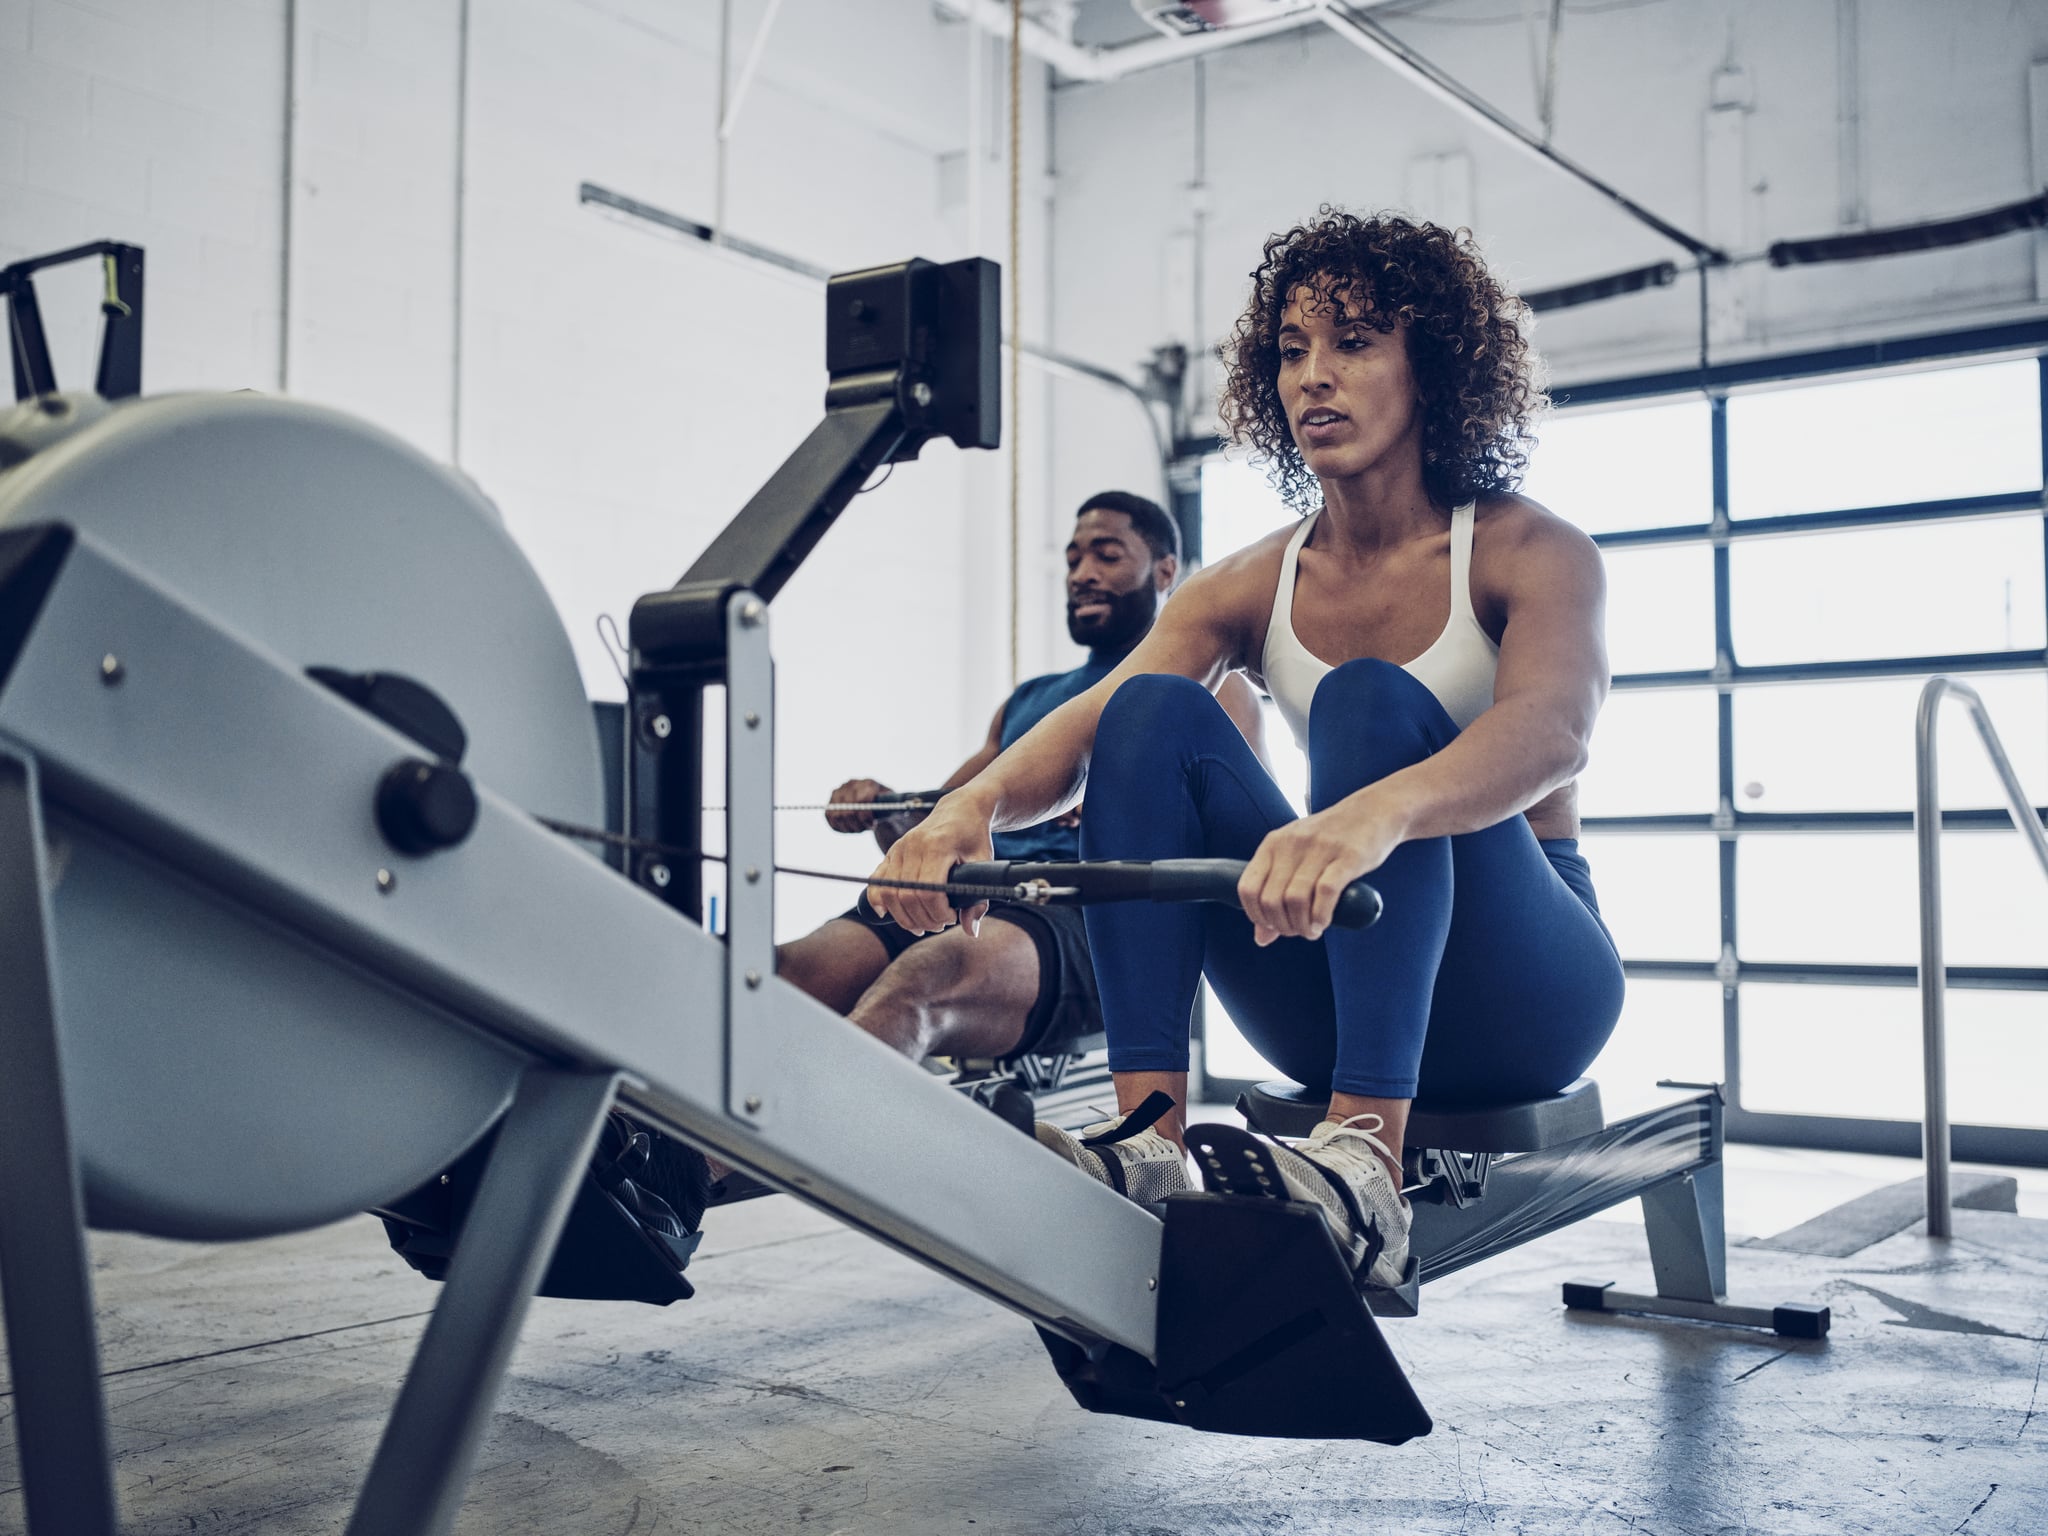 Benefits of a rowing machine